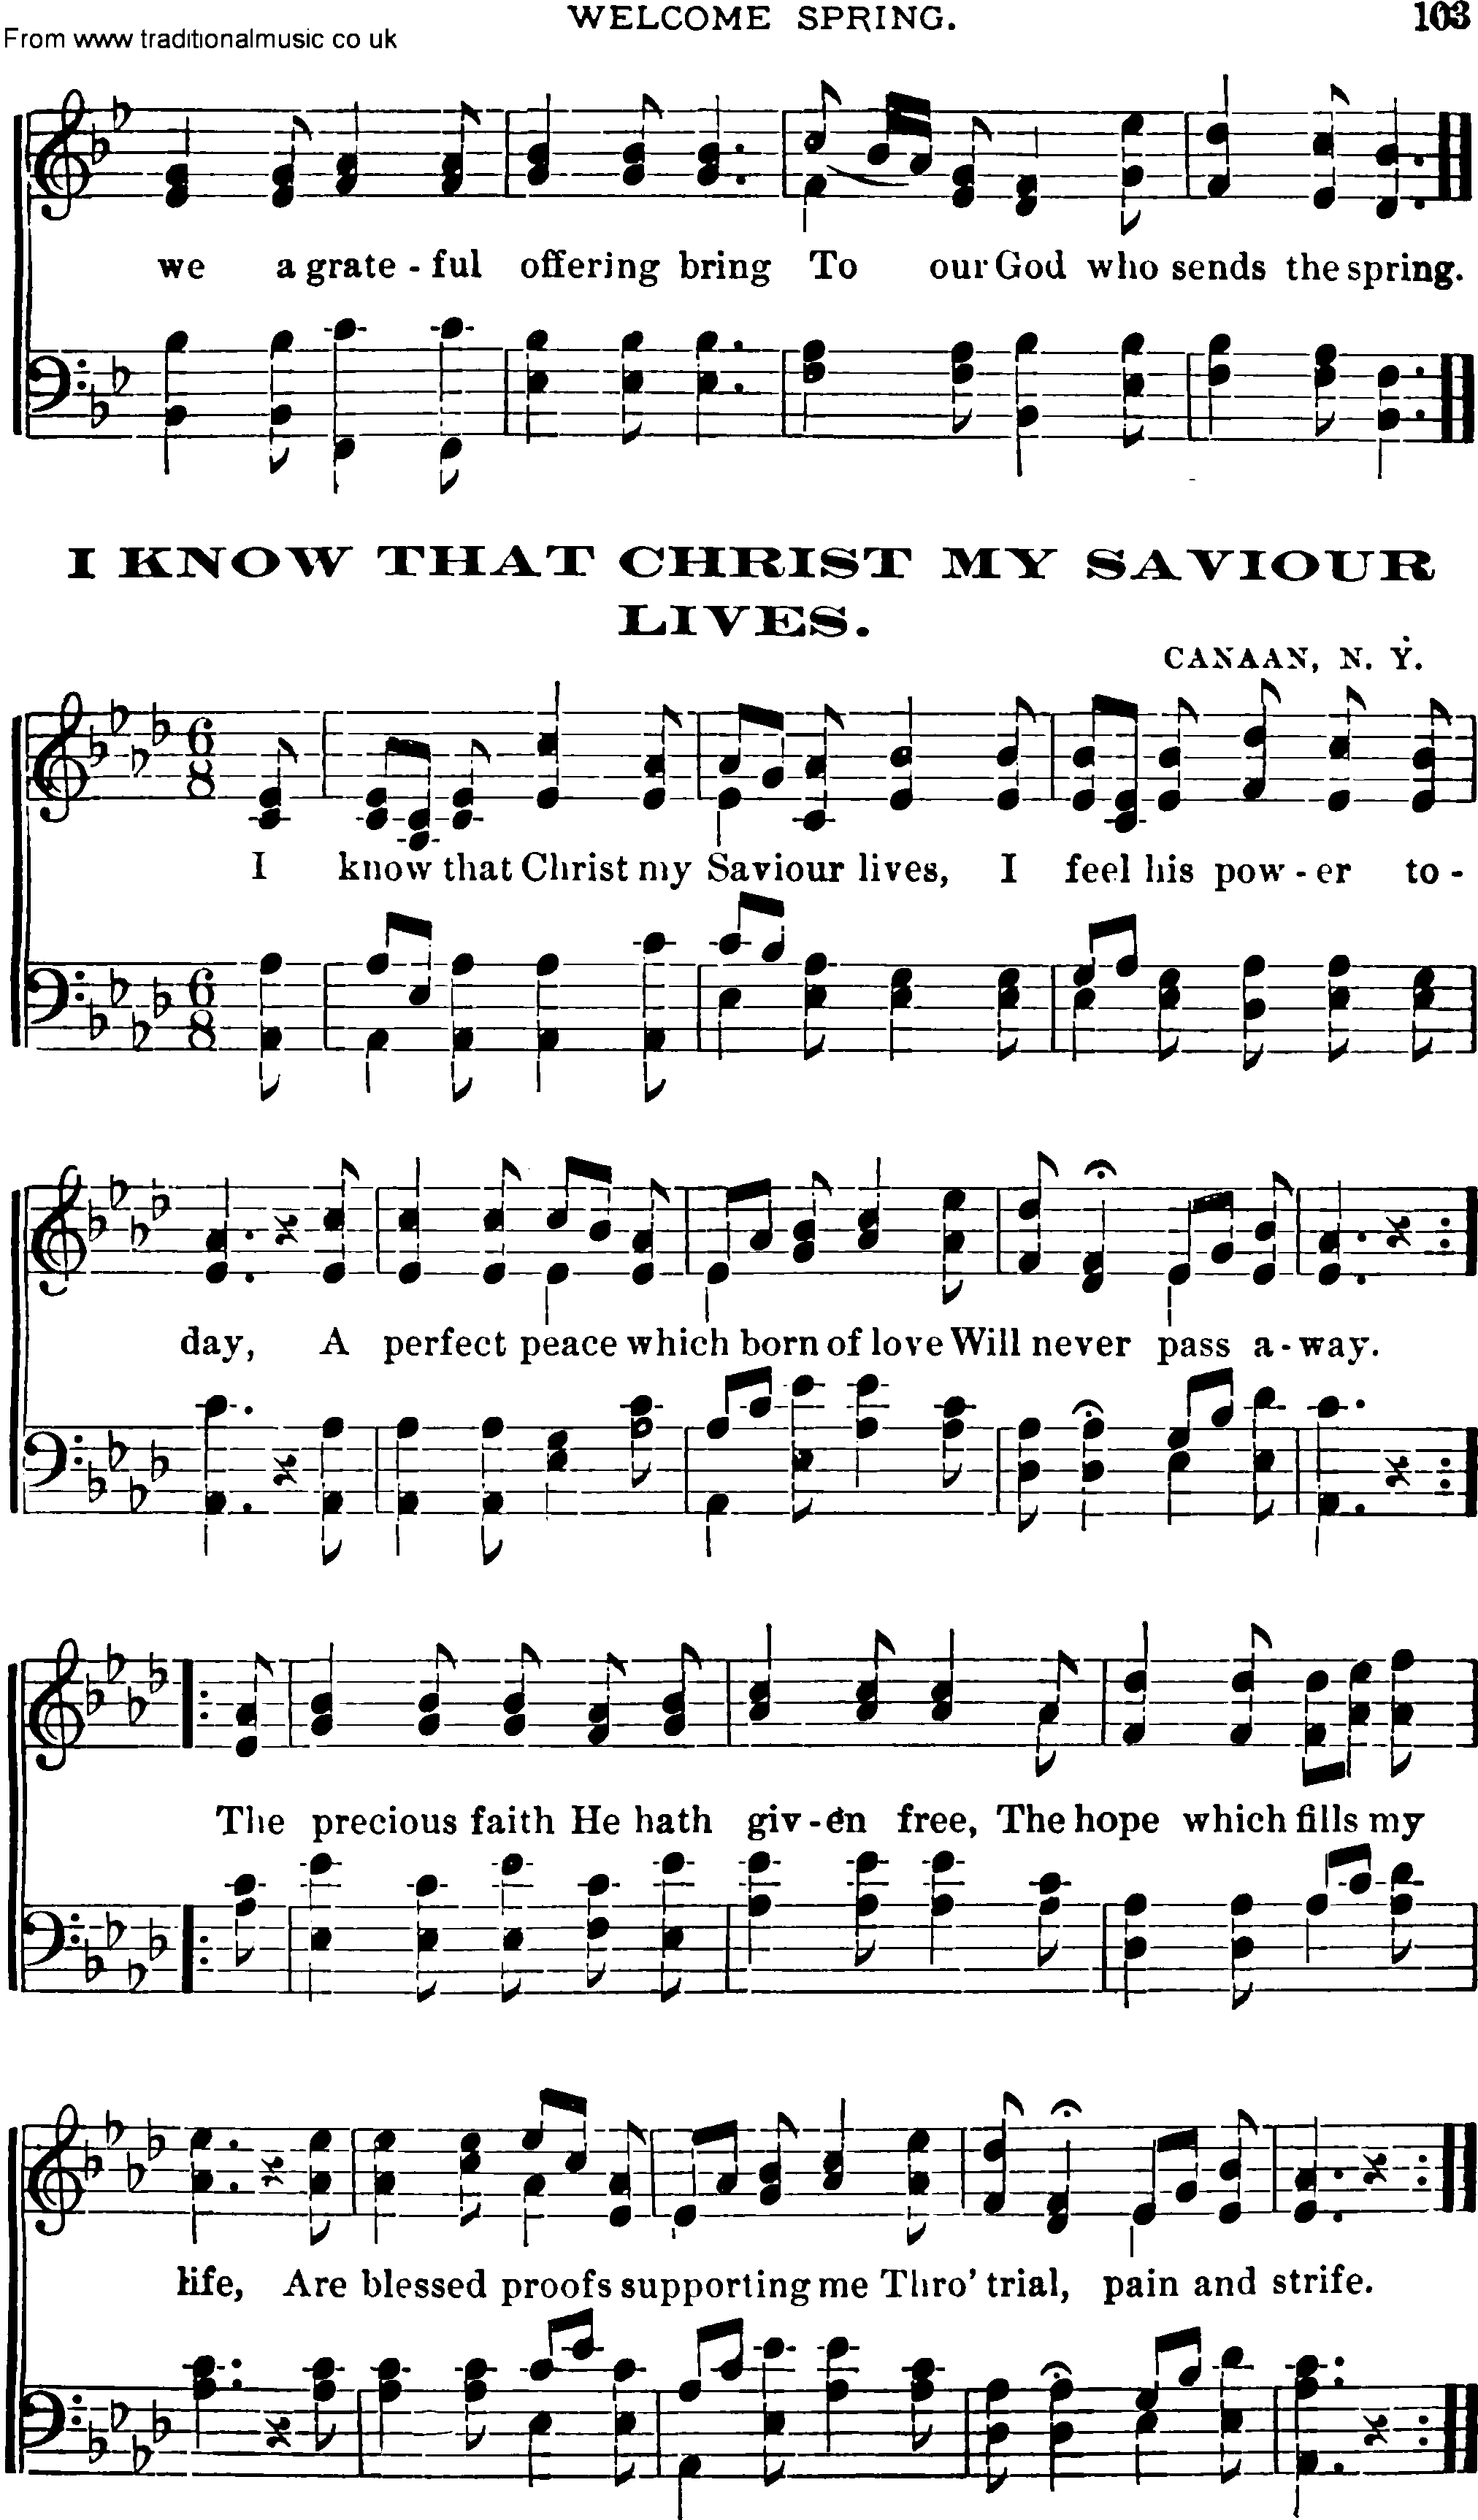 Shaker Music collection, Hymn: I Know That Chist My Saviour Lives, sheetmusic and PDF